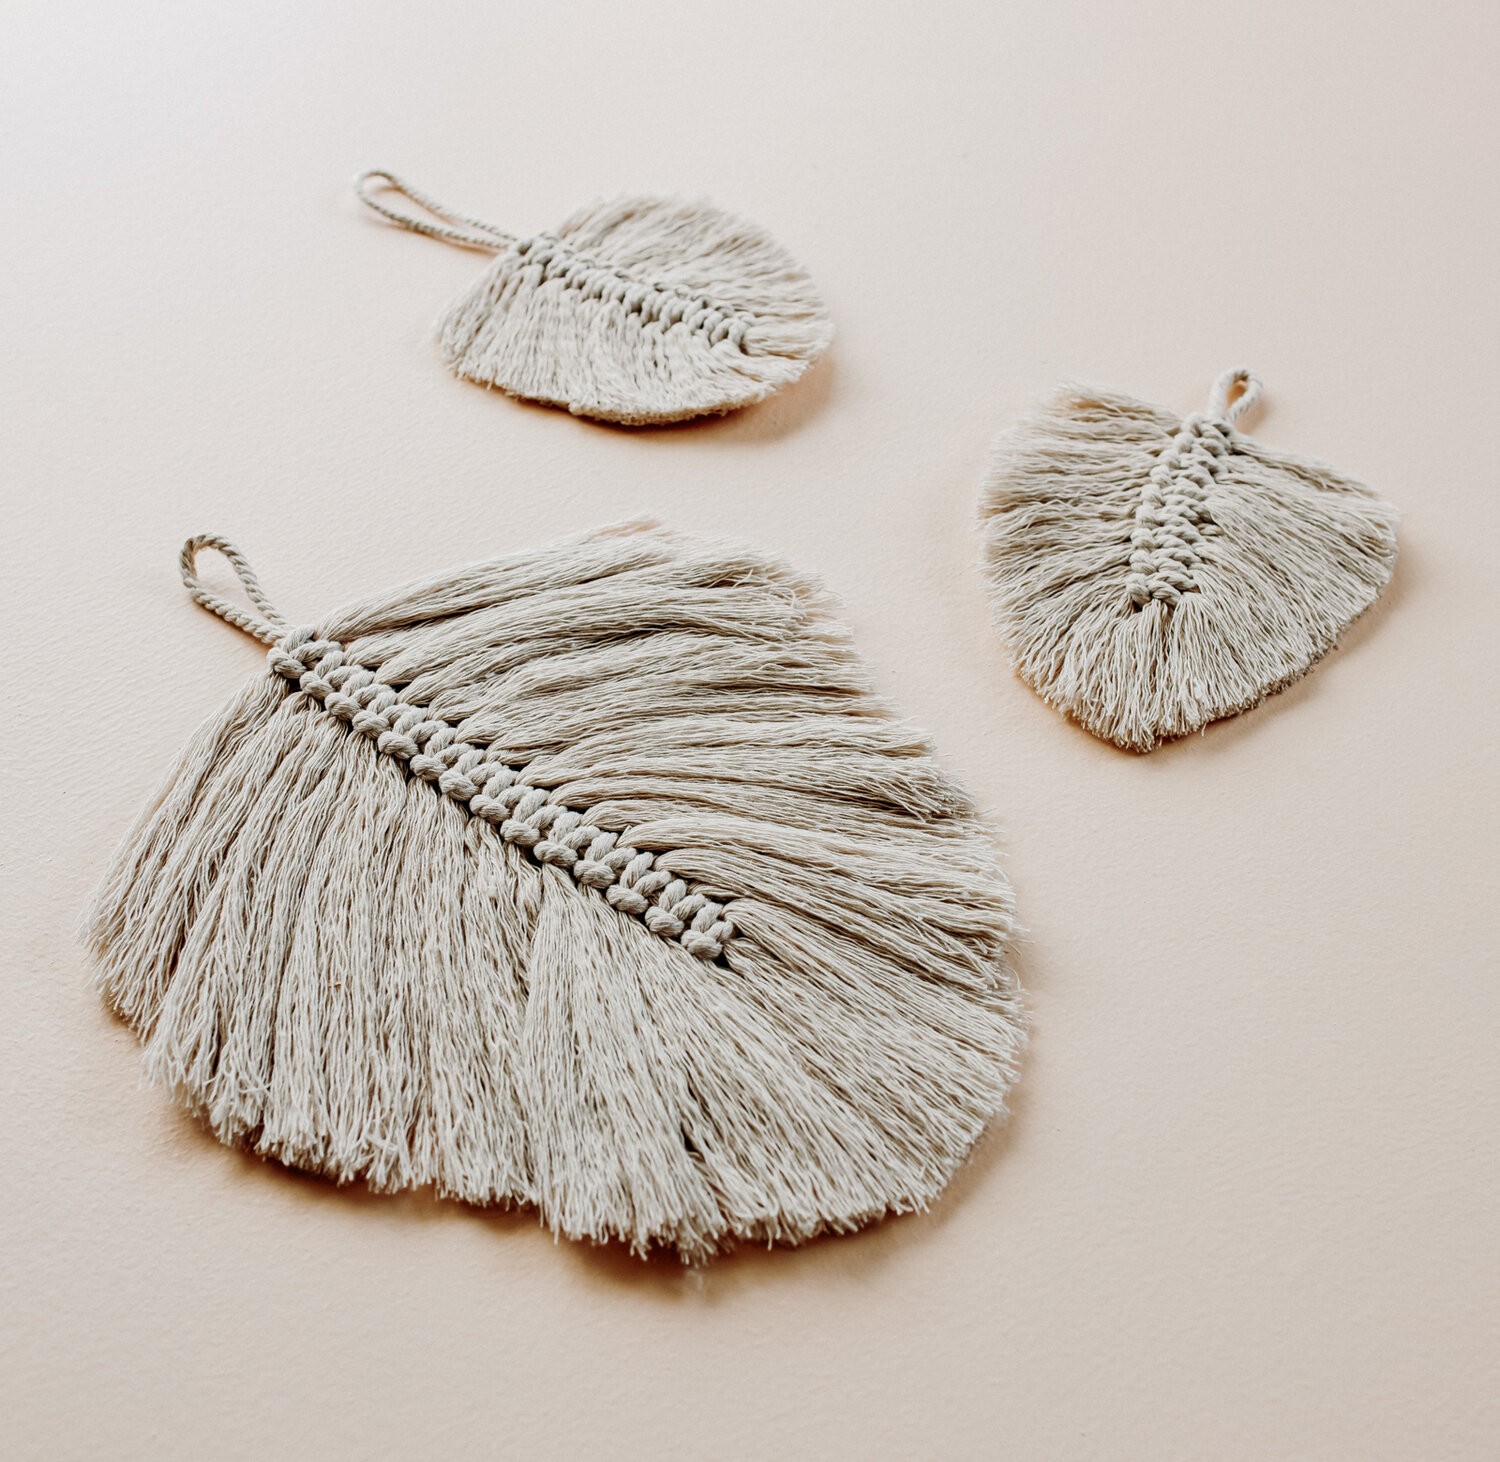 A large macrame leaf and two small macrame leaves lay on a table.